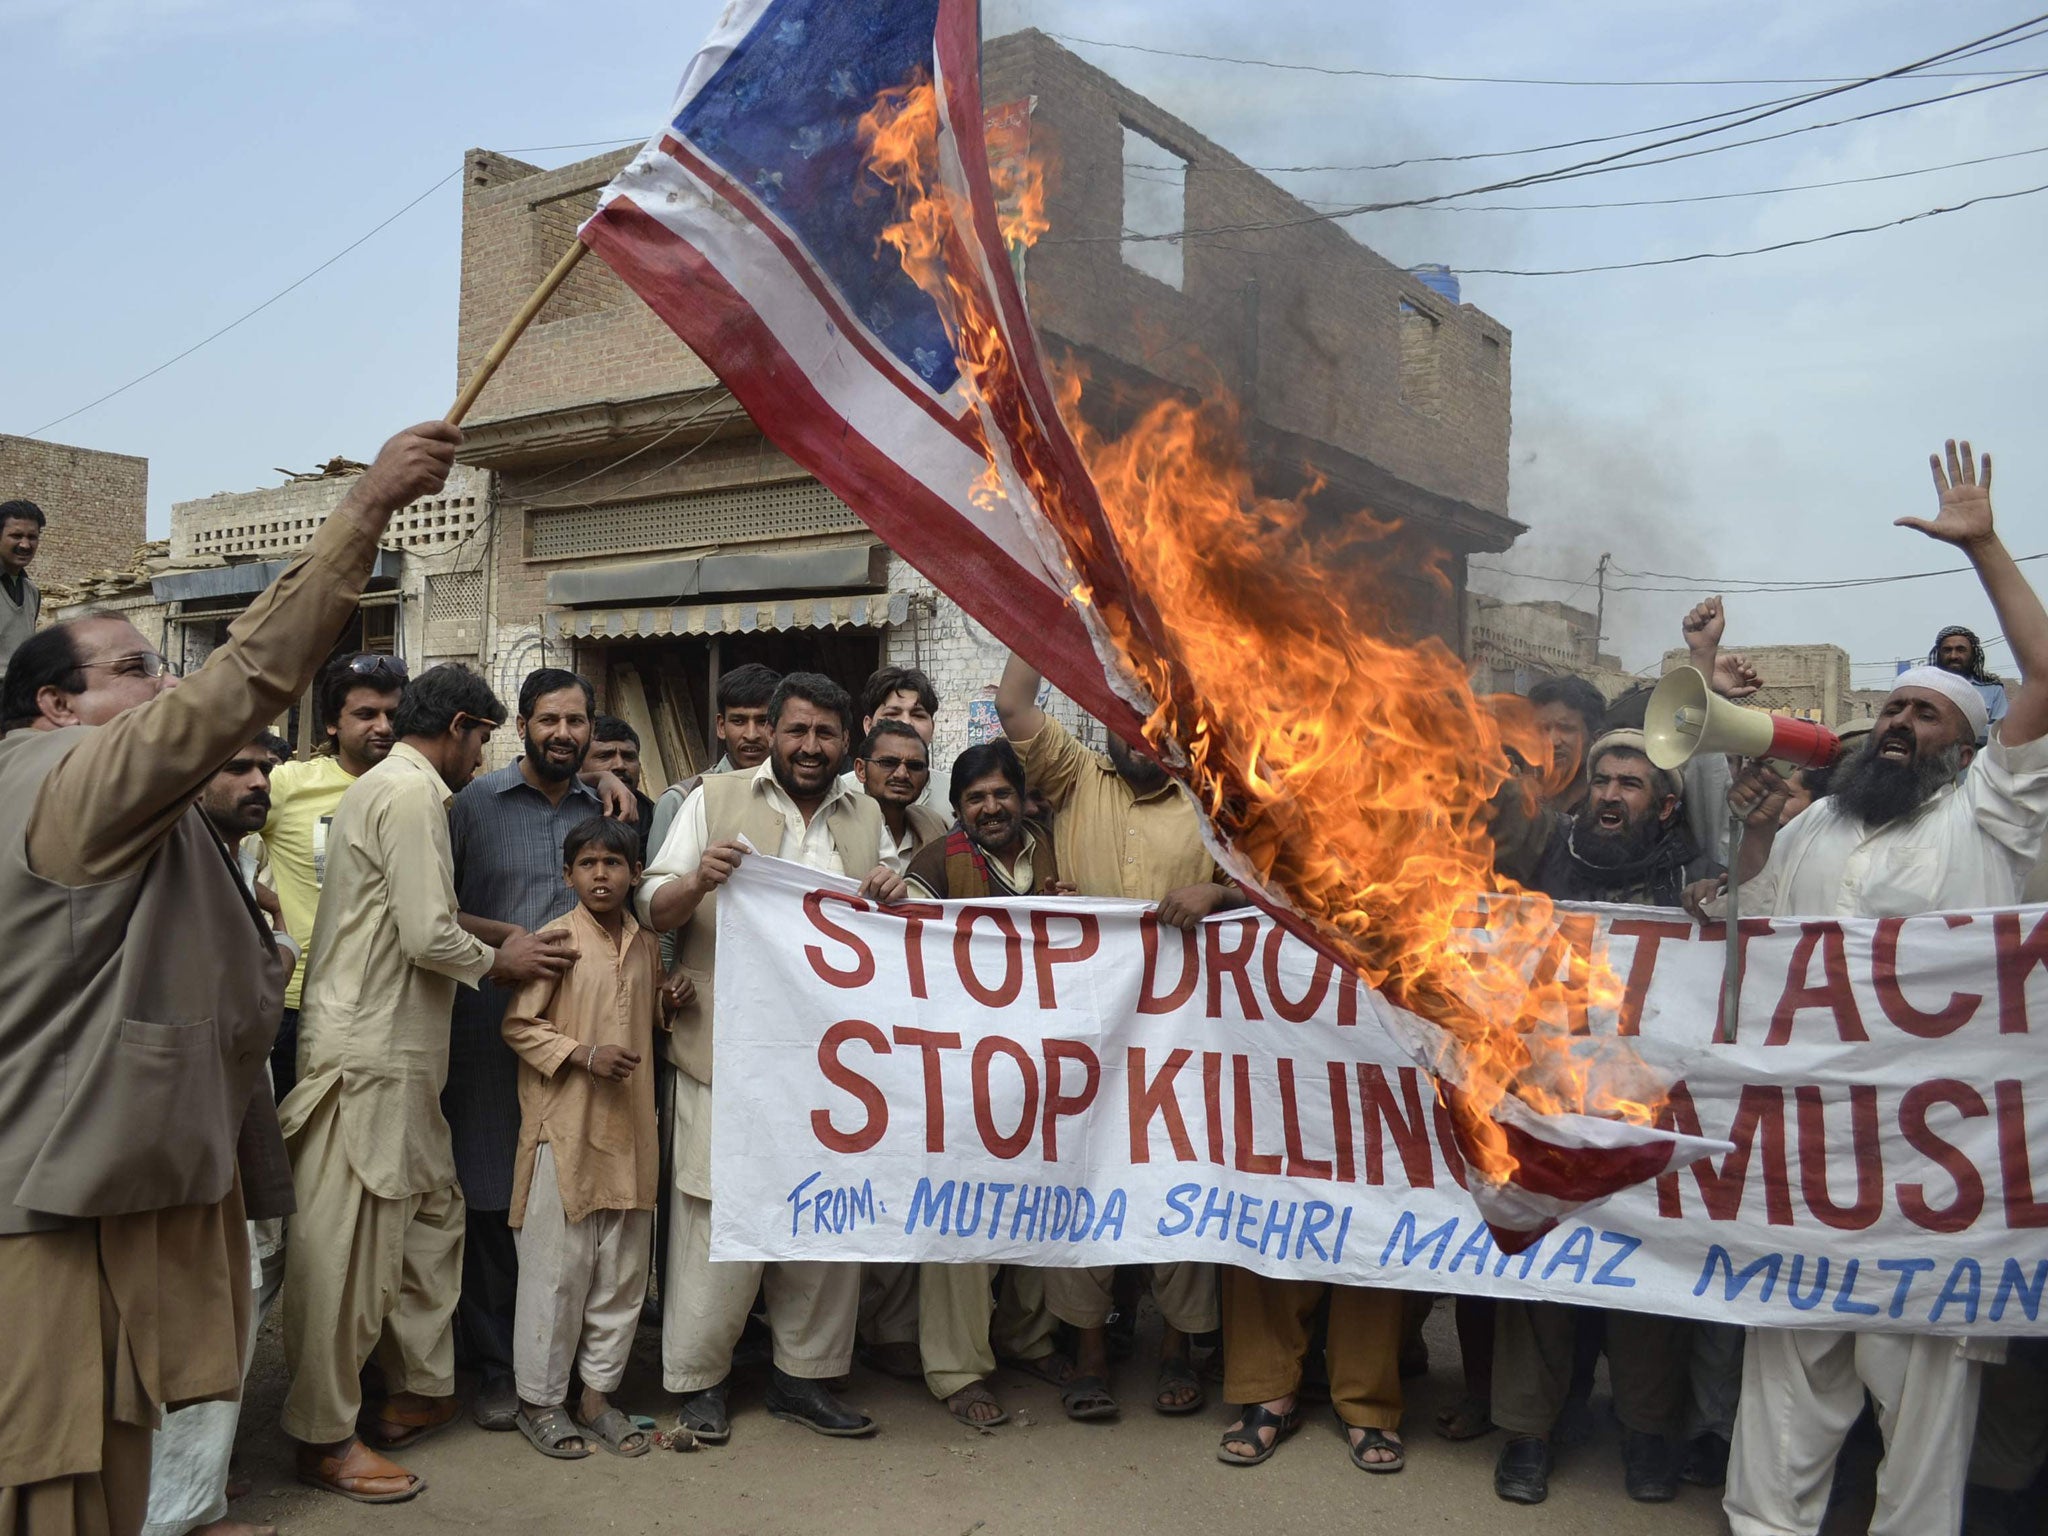 Activists of Pakistan Muthidda Shehri Mahaz burn the US flag during a protest in Multan on March 14, 2012, against US drone attacks. A US drone strike in Pakistan's lawless tribal belt on March 13 killed eight fighters supporting the Taliban in Afghanistan but not hostile to Pakistani authorities, local officials said.